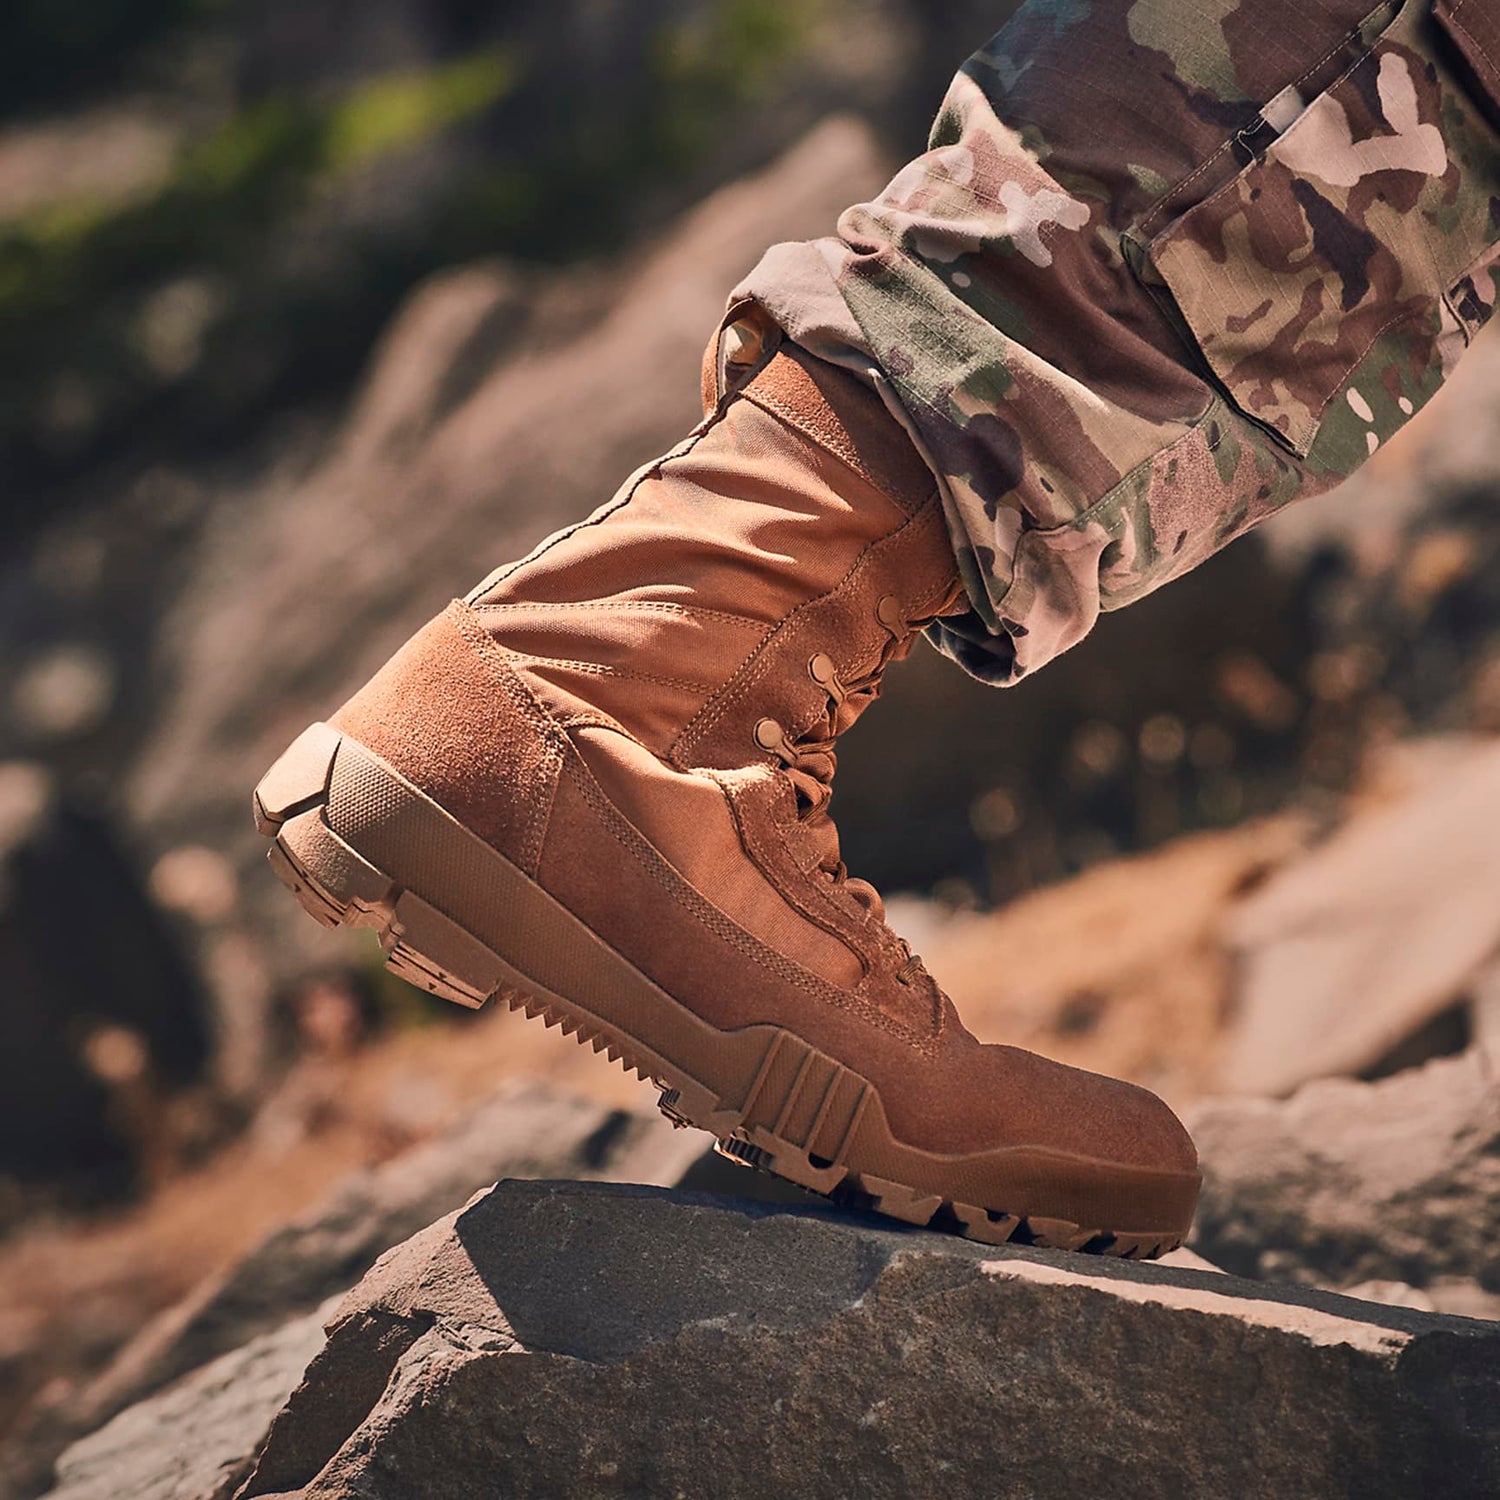 NIKE SFB JUNGLE 8" Leather Coyote Boots – Combat Footwear